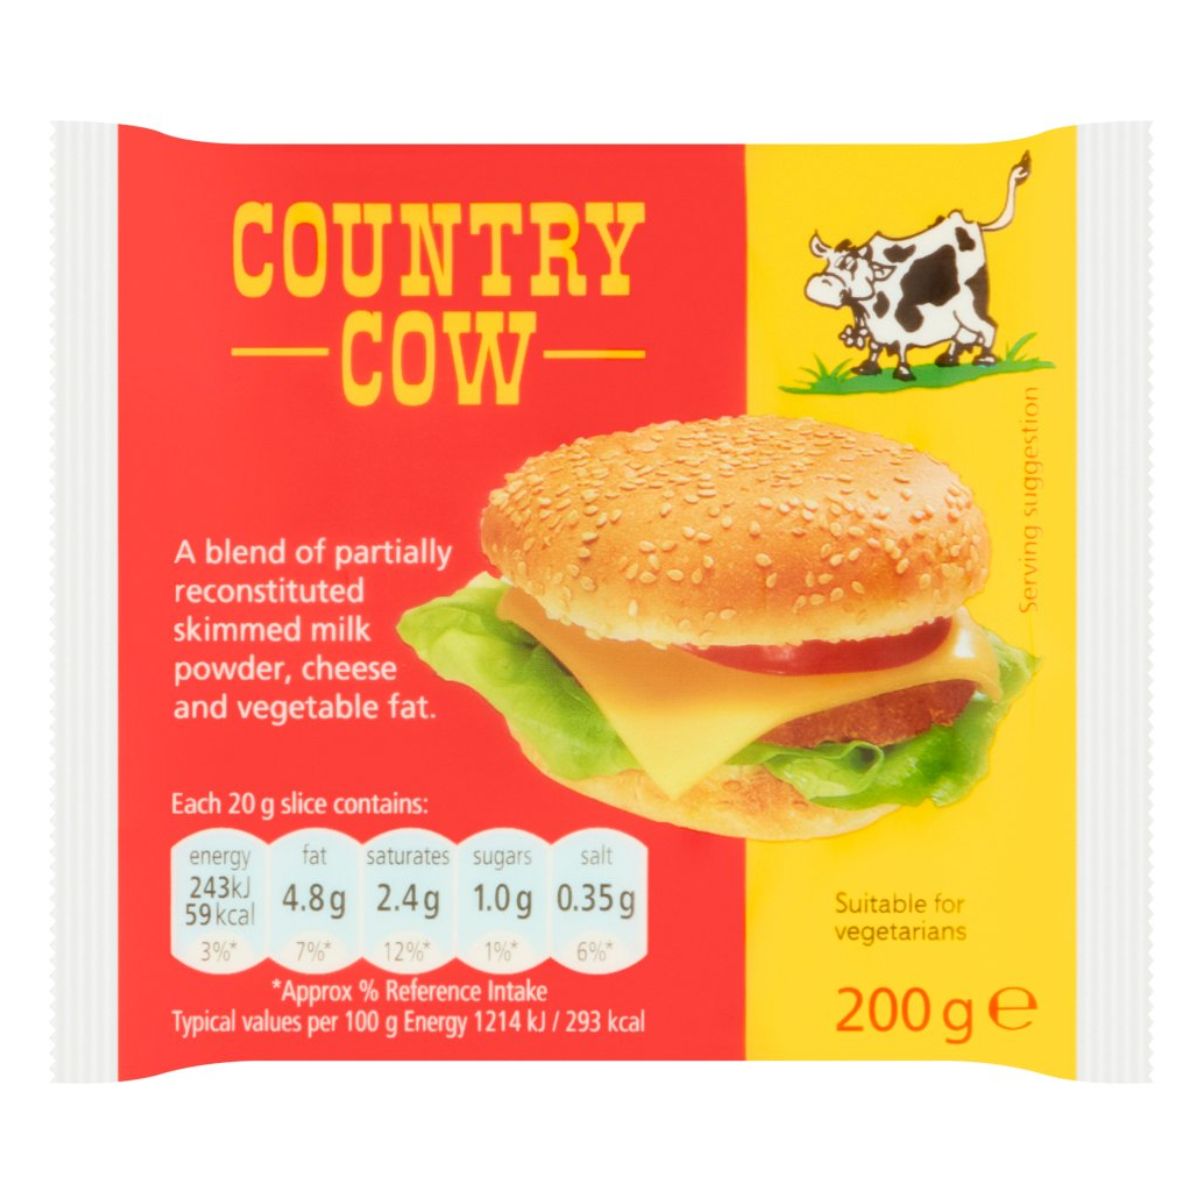 Packaging for "Country Cow - Cheese - 200g" burger, displaying a photo of a burger and list of ingredients on a bright yellow background.